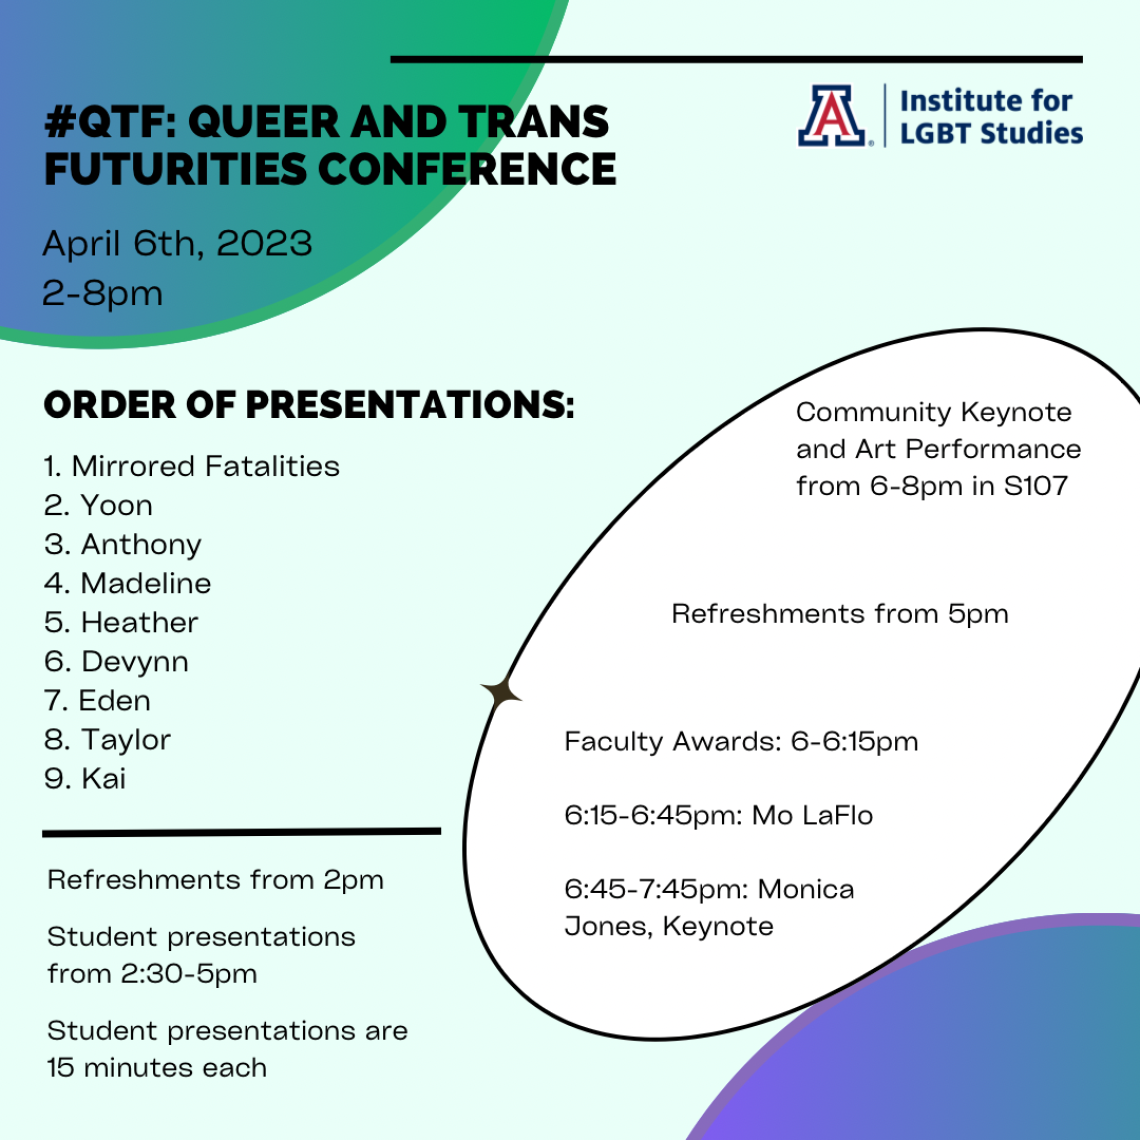 Queer and Trans Futurities Conference. April 6th, 2023 2-8pm. 2pm refreshments, 2:30-5pm presenters, 5pm refreshments, 6-8pm faculty awards, keynote and performer